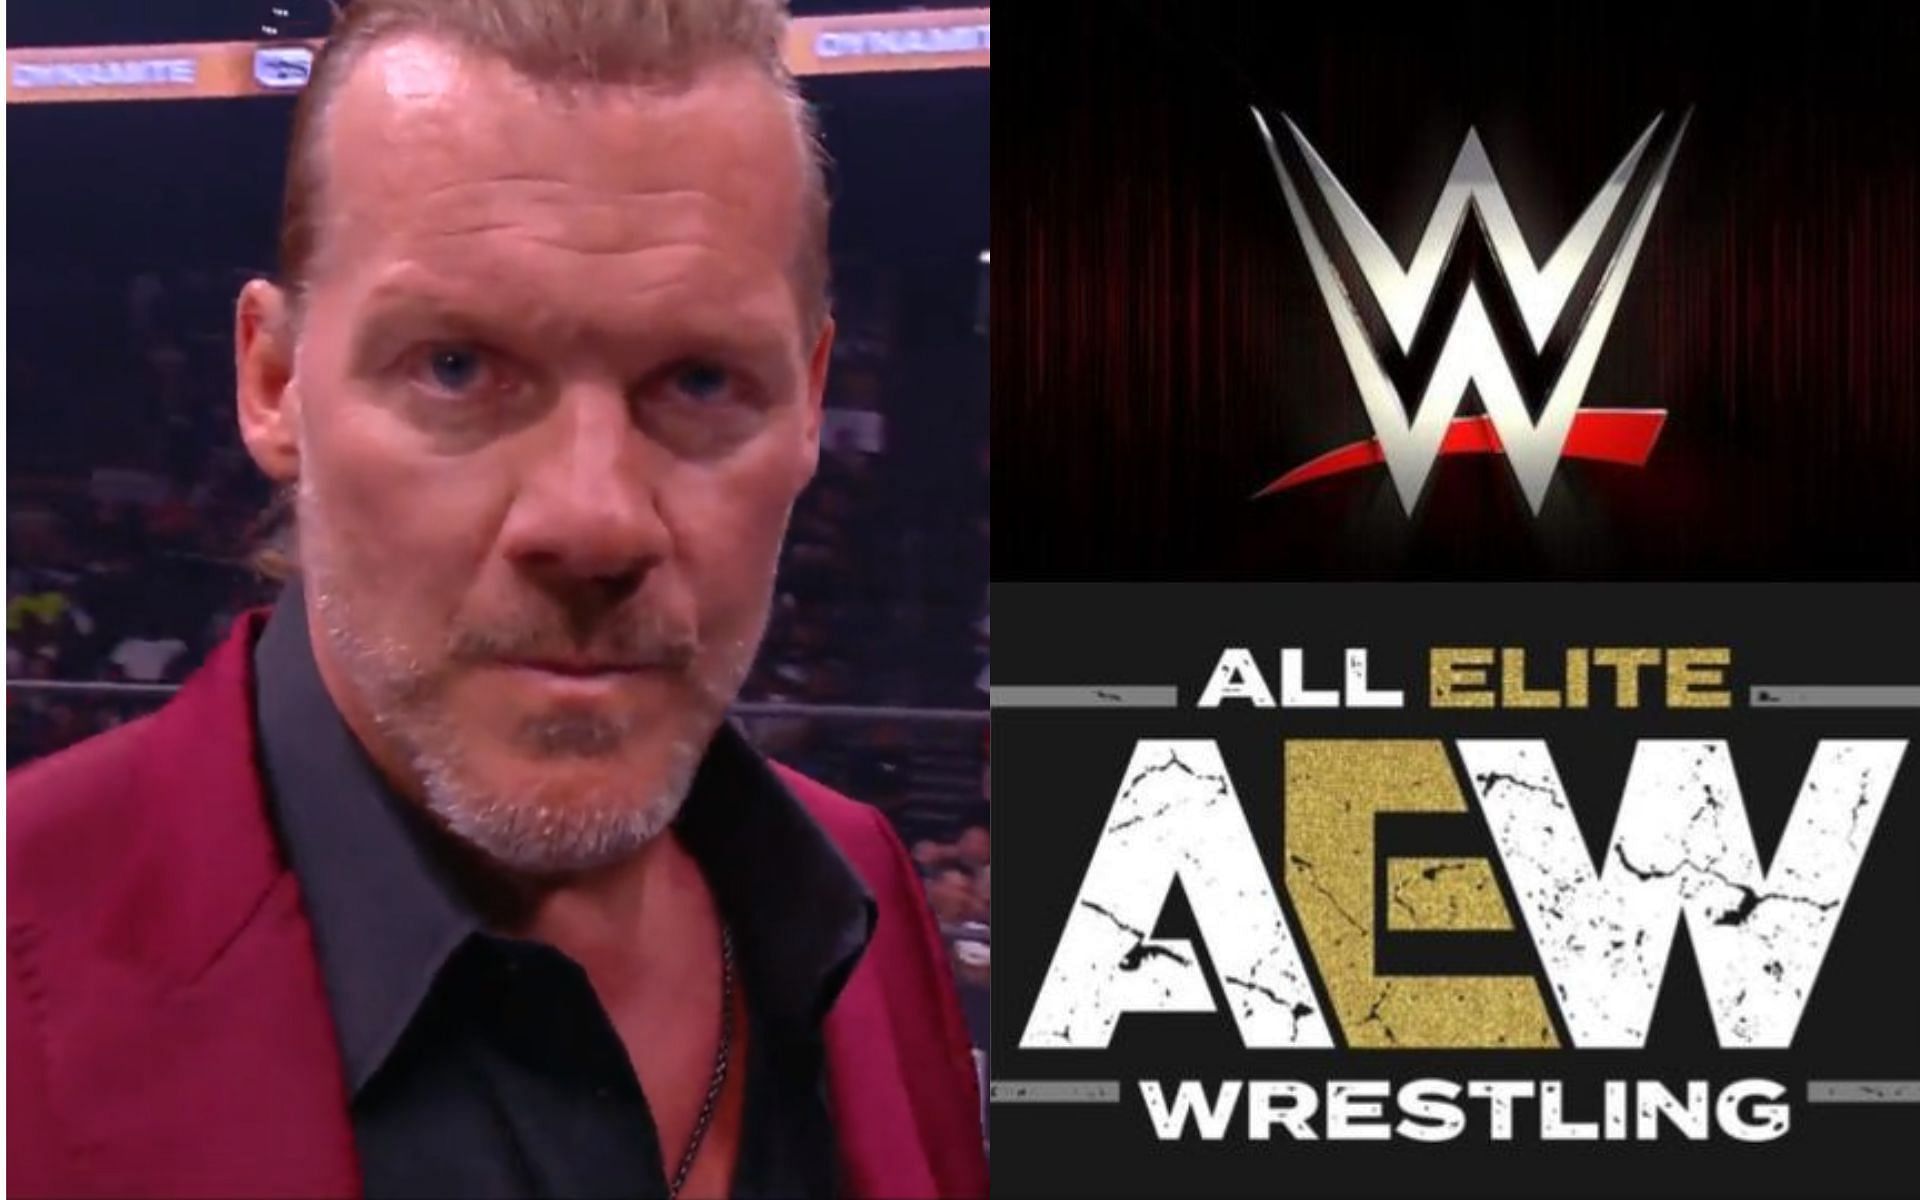 Chris Jericho (left) and AEW and WWE logos (right)